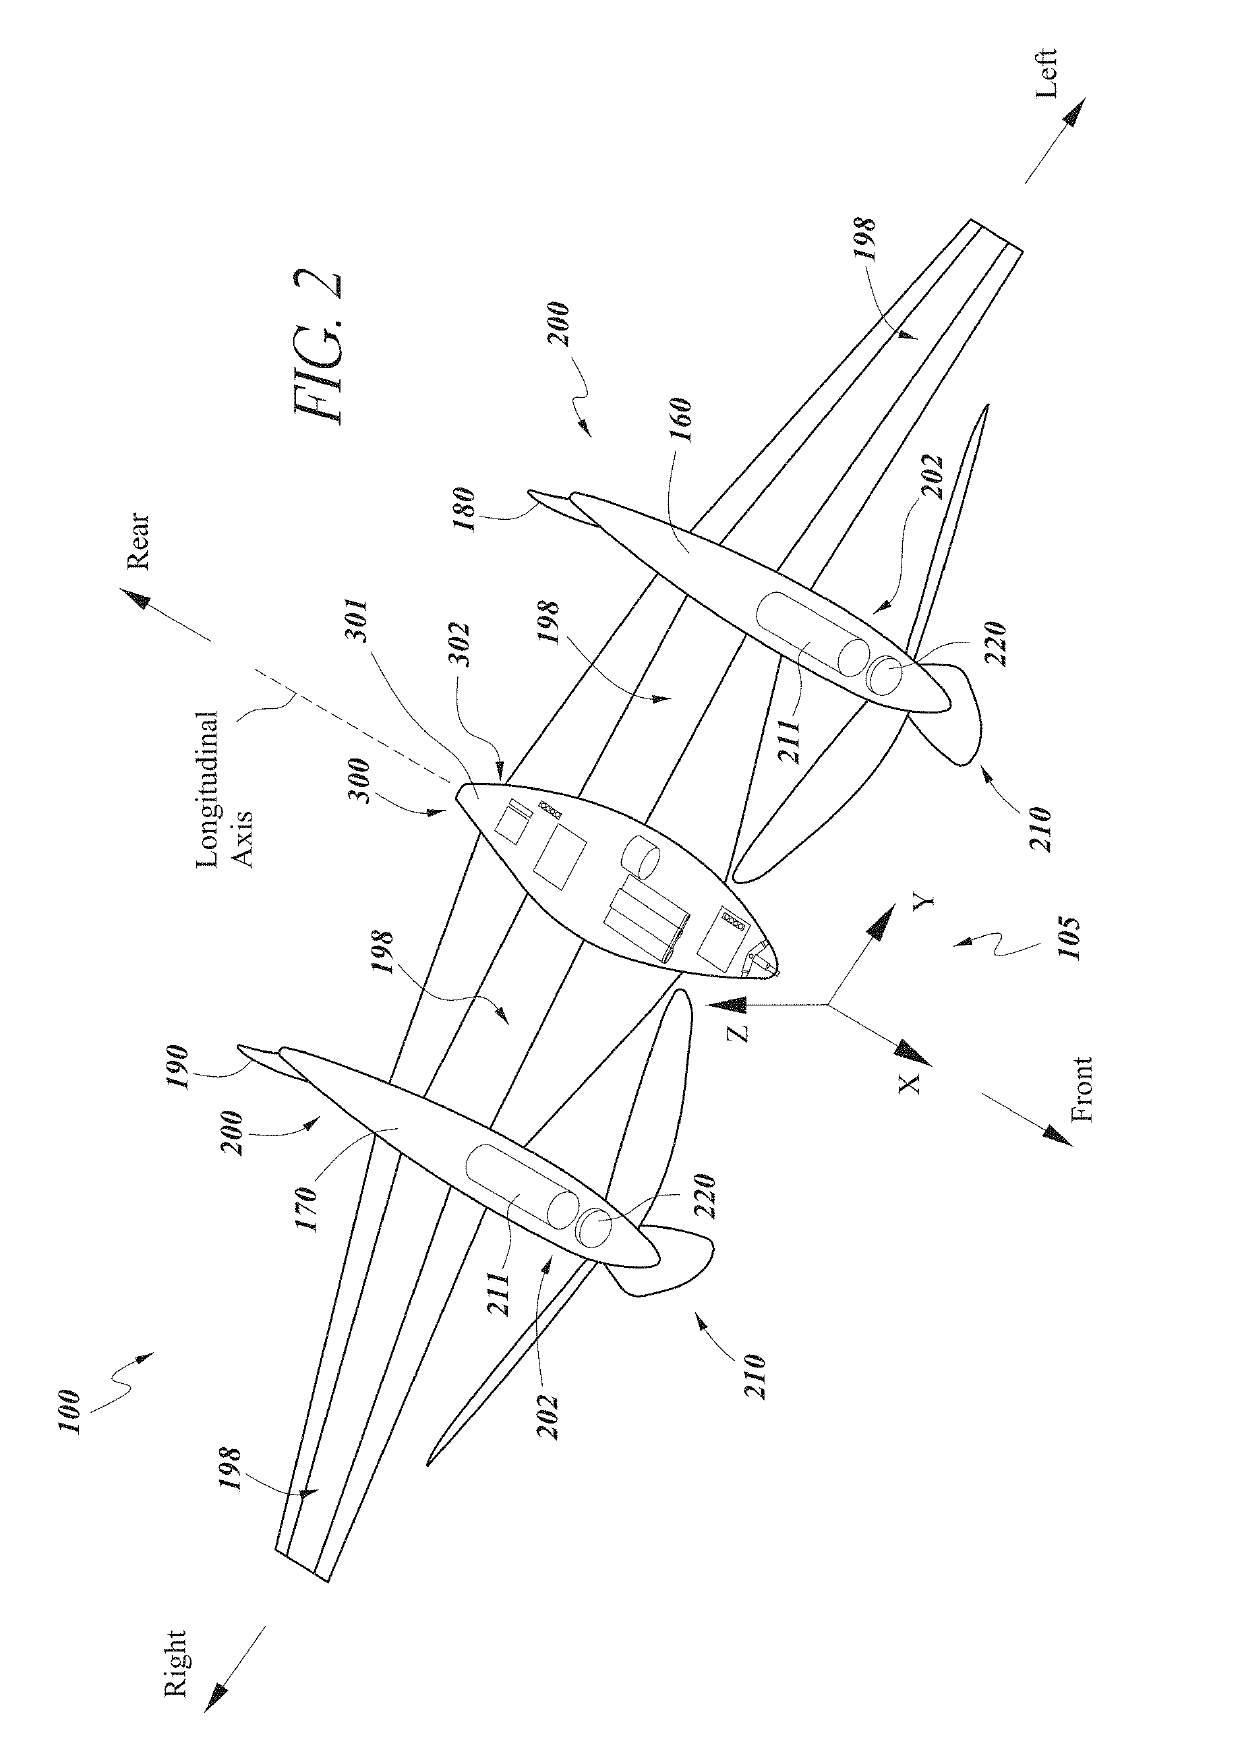 Tail-Sitter Aircraft With Hybrid Propulsion